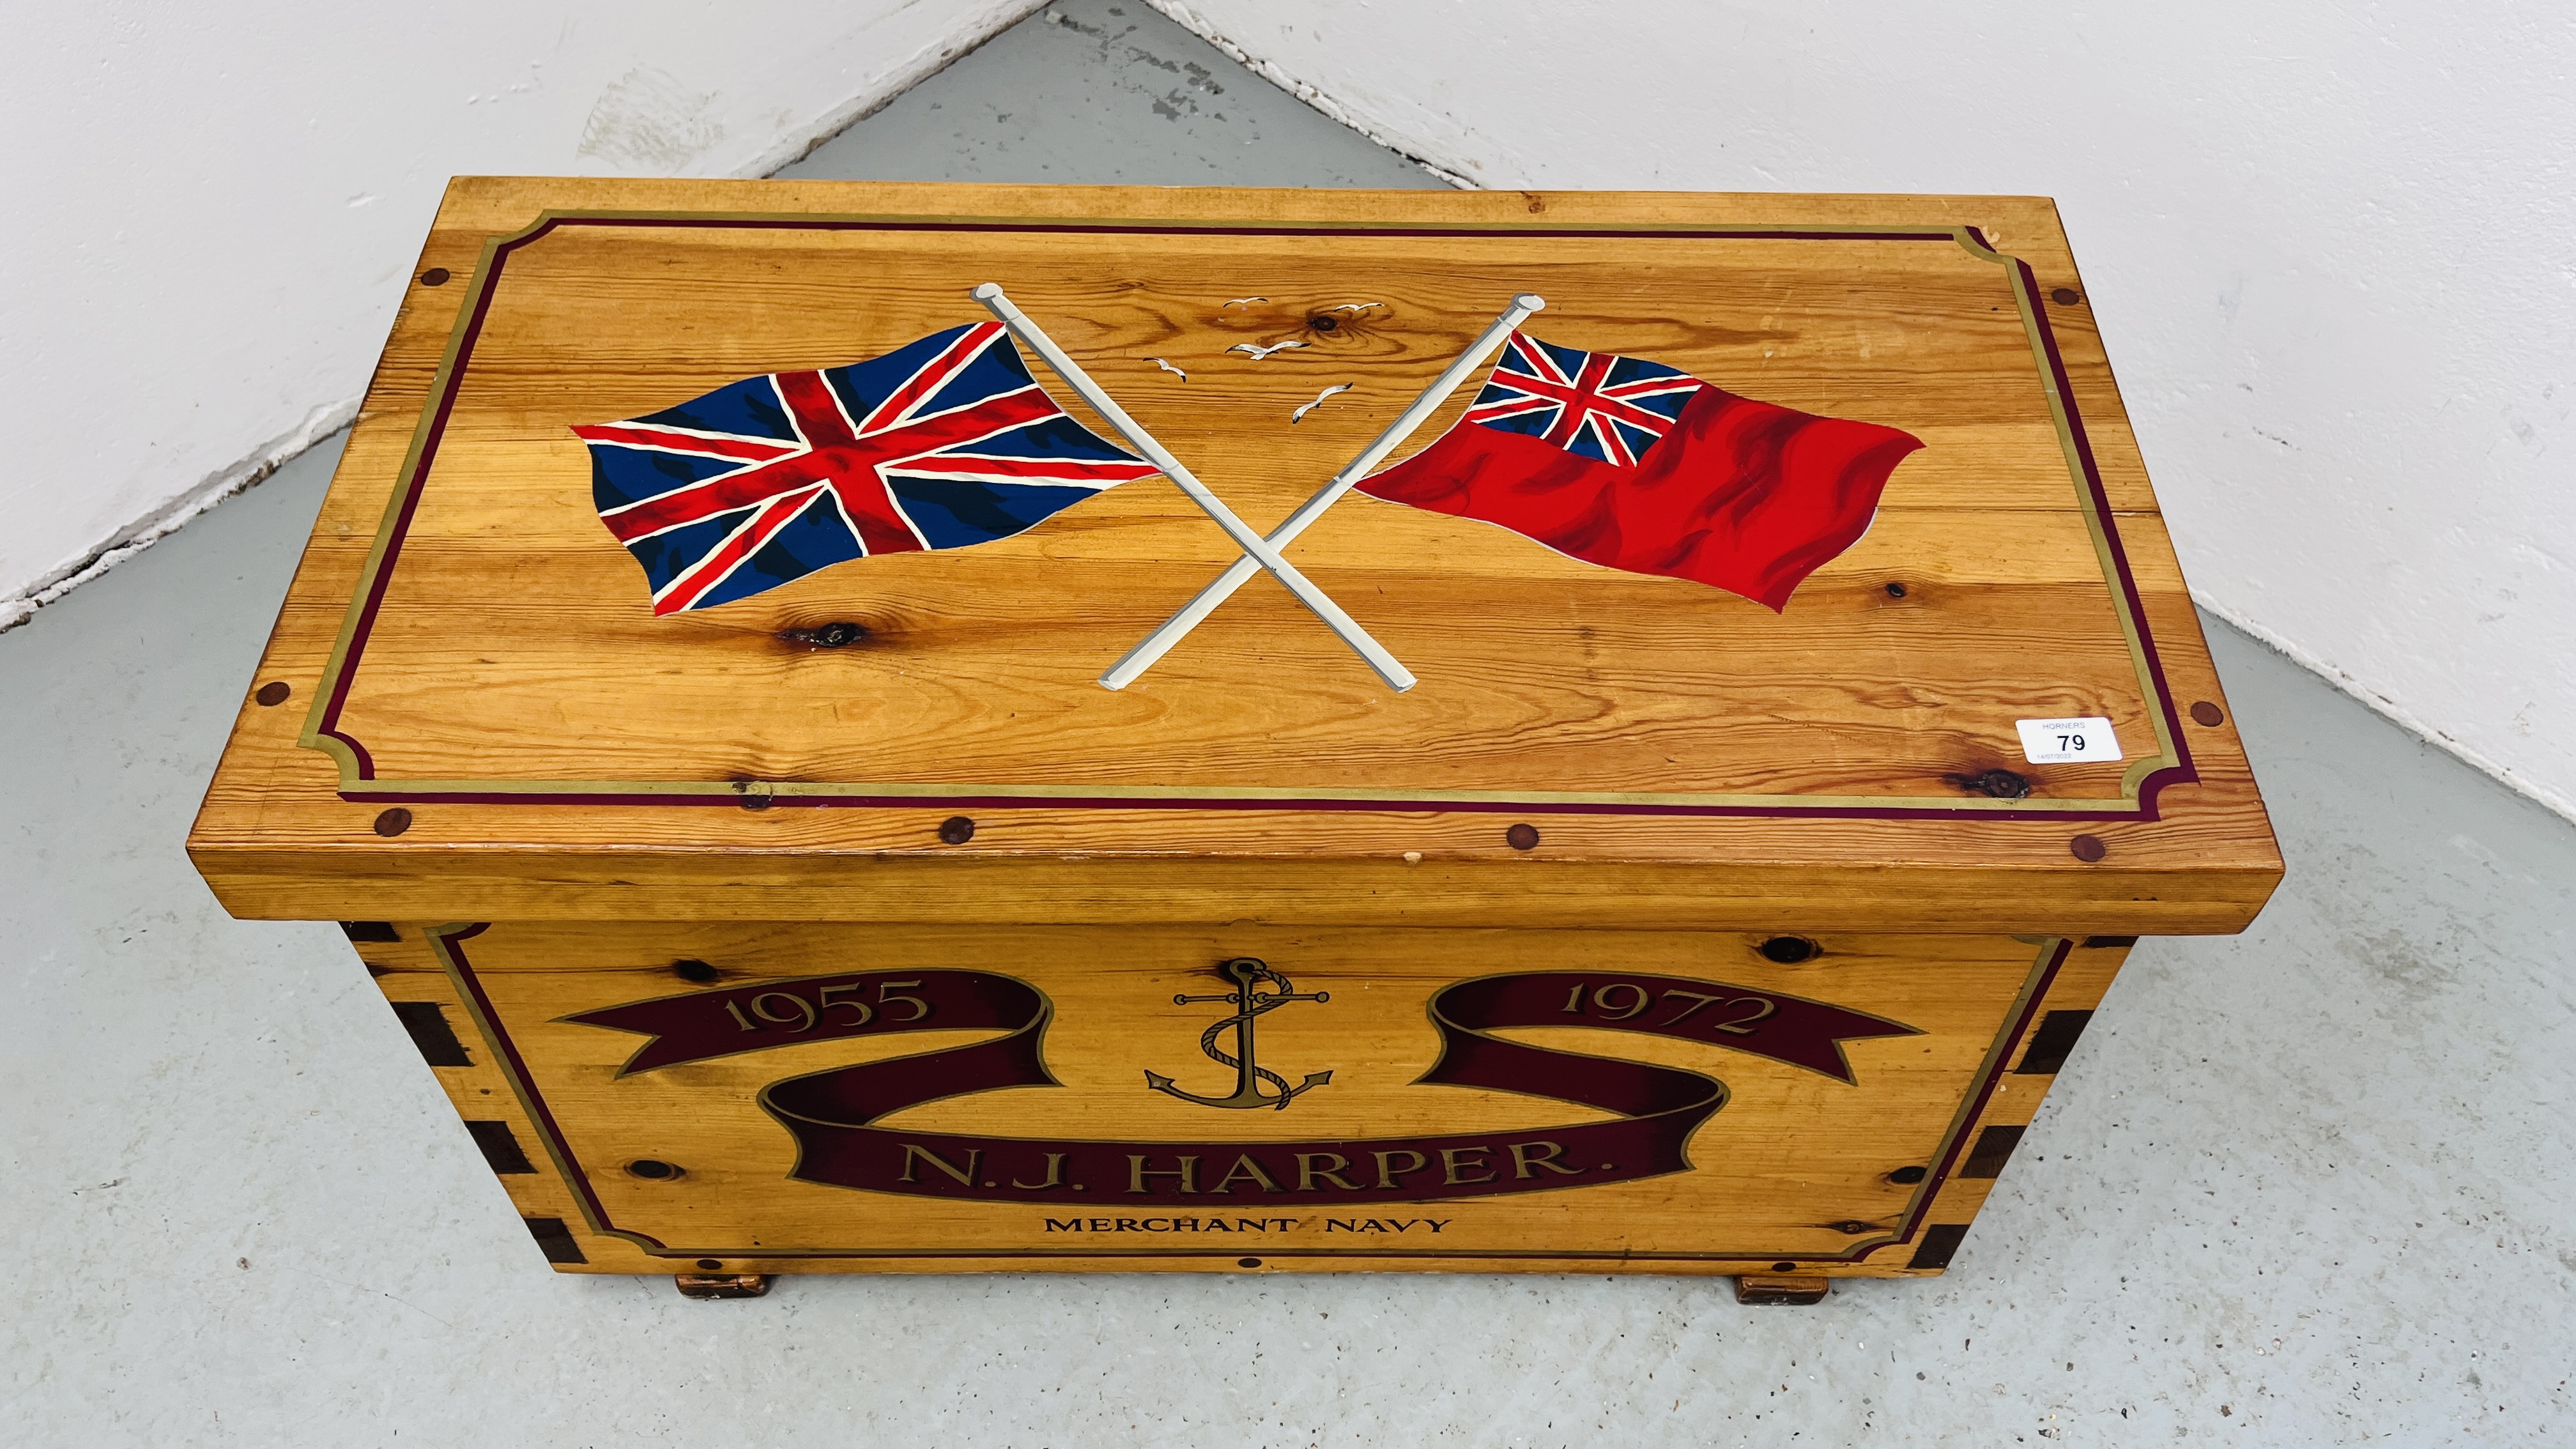 A WAXED PINE REPRODUCTION SEAMANS KIT BOX COMPLETE WITH BECKETT HANDLES AND UNION JACK FLAGS - Image 2 of 16